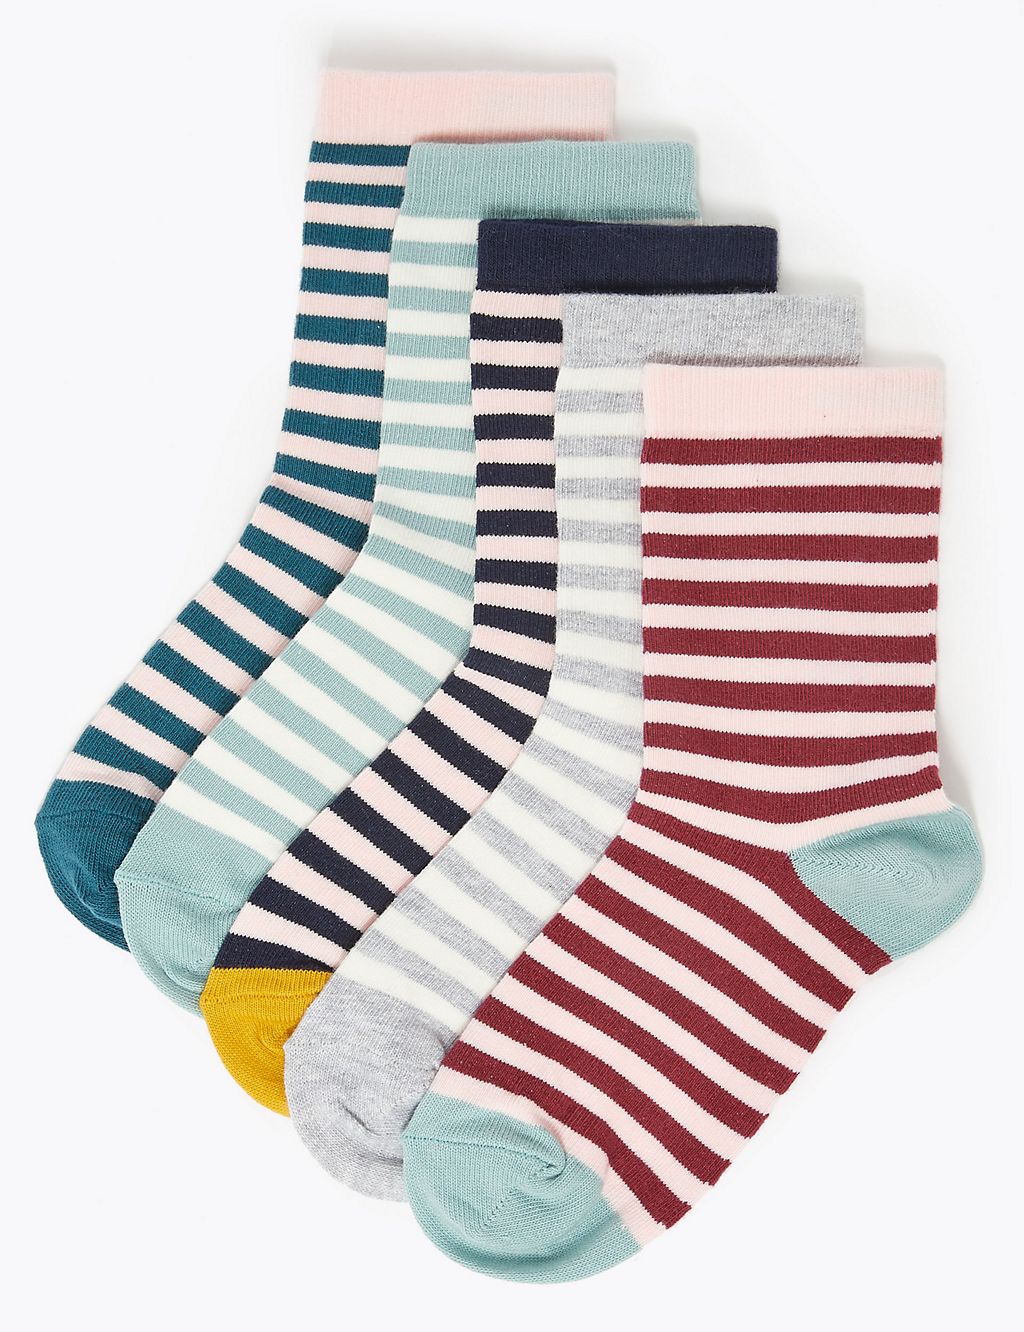 5 Pairs of Striped Socks 1 of 1